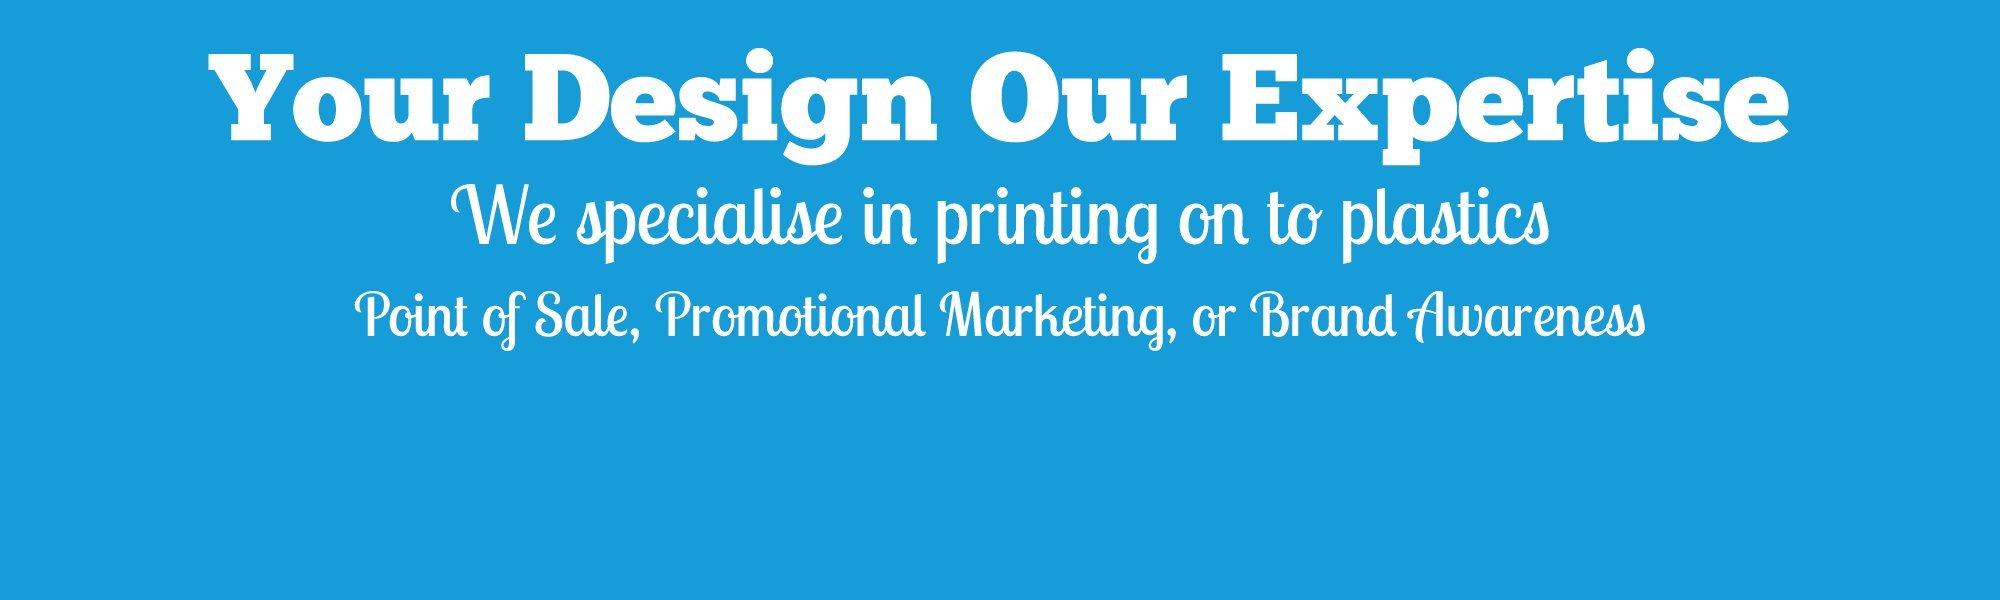 your design our expertise banner